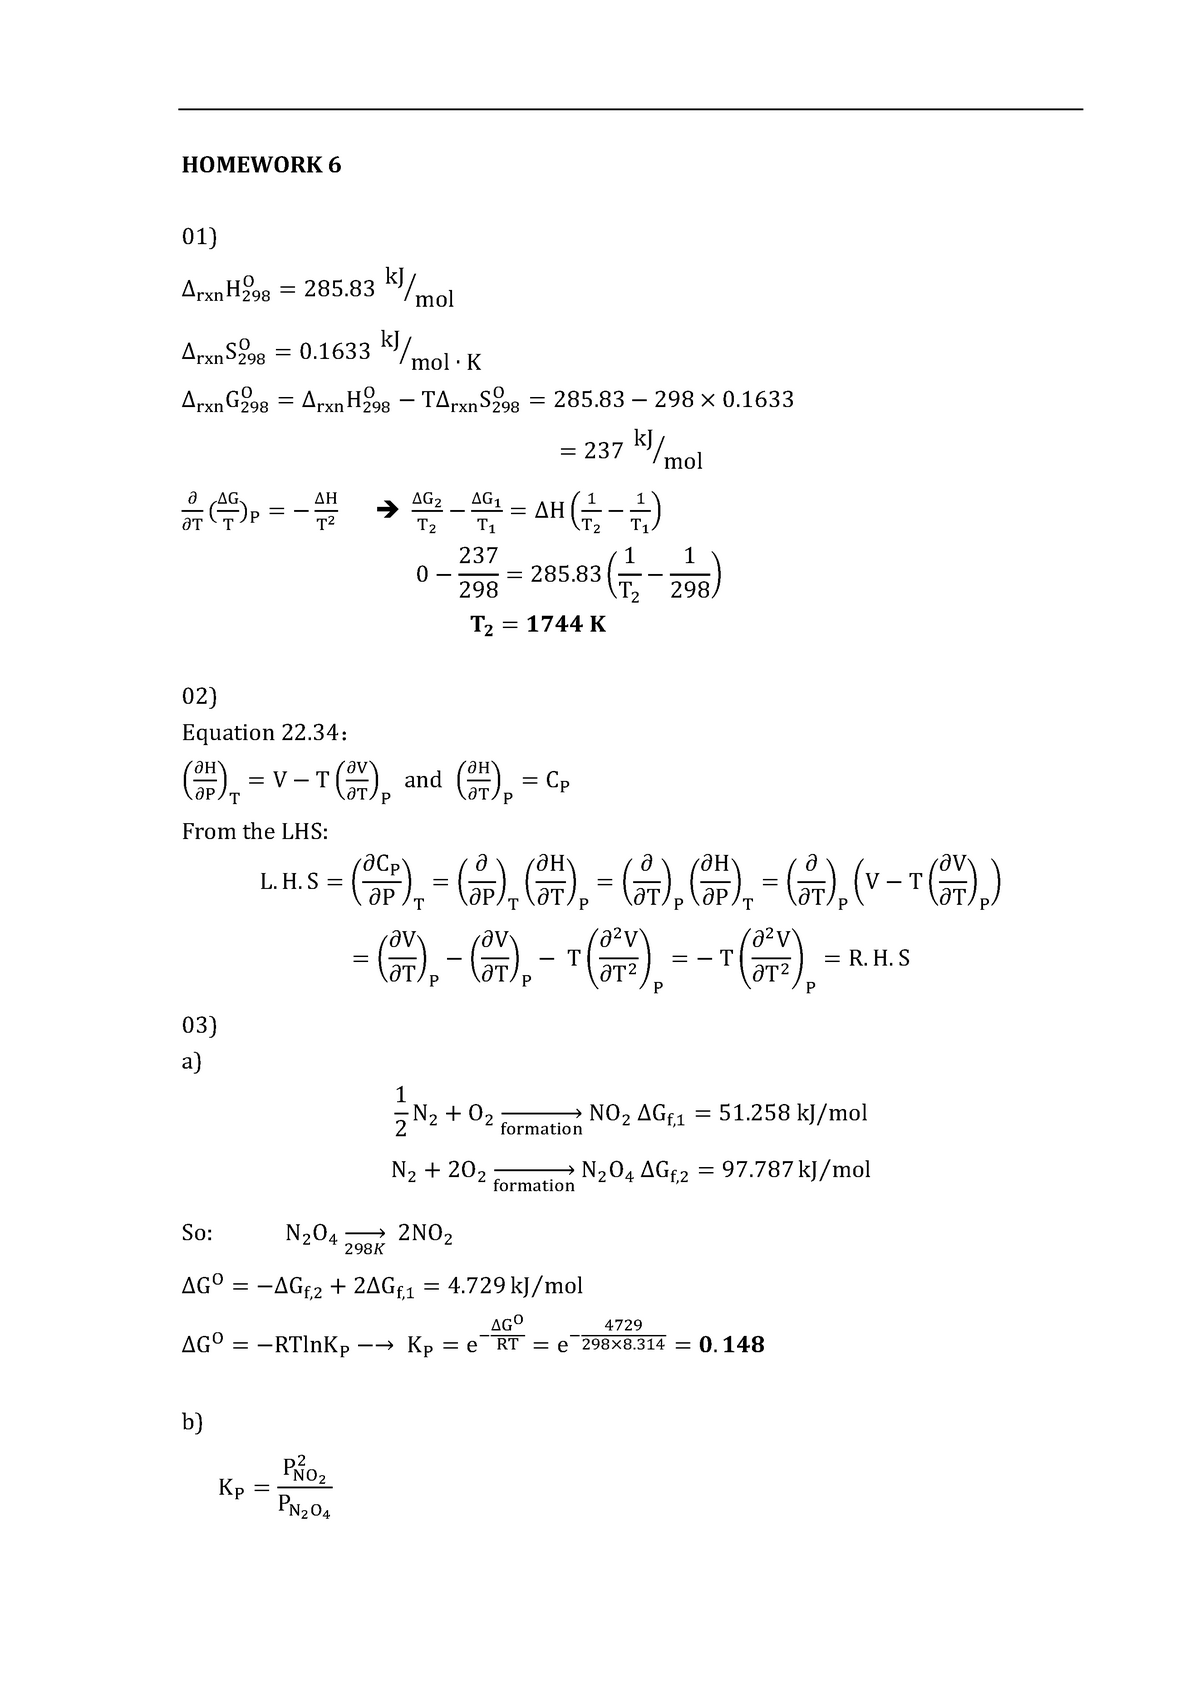 Chem3321 hwk6 soln - Physical chemistry assignments from Dr.Nielsen ...